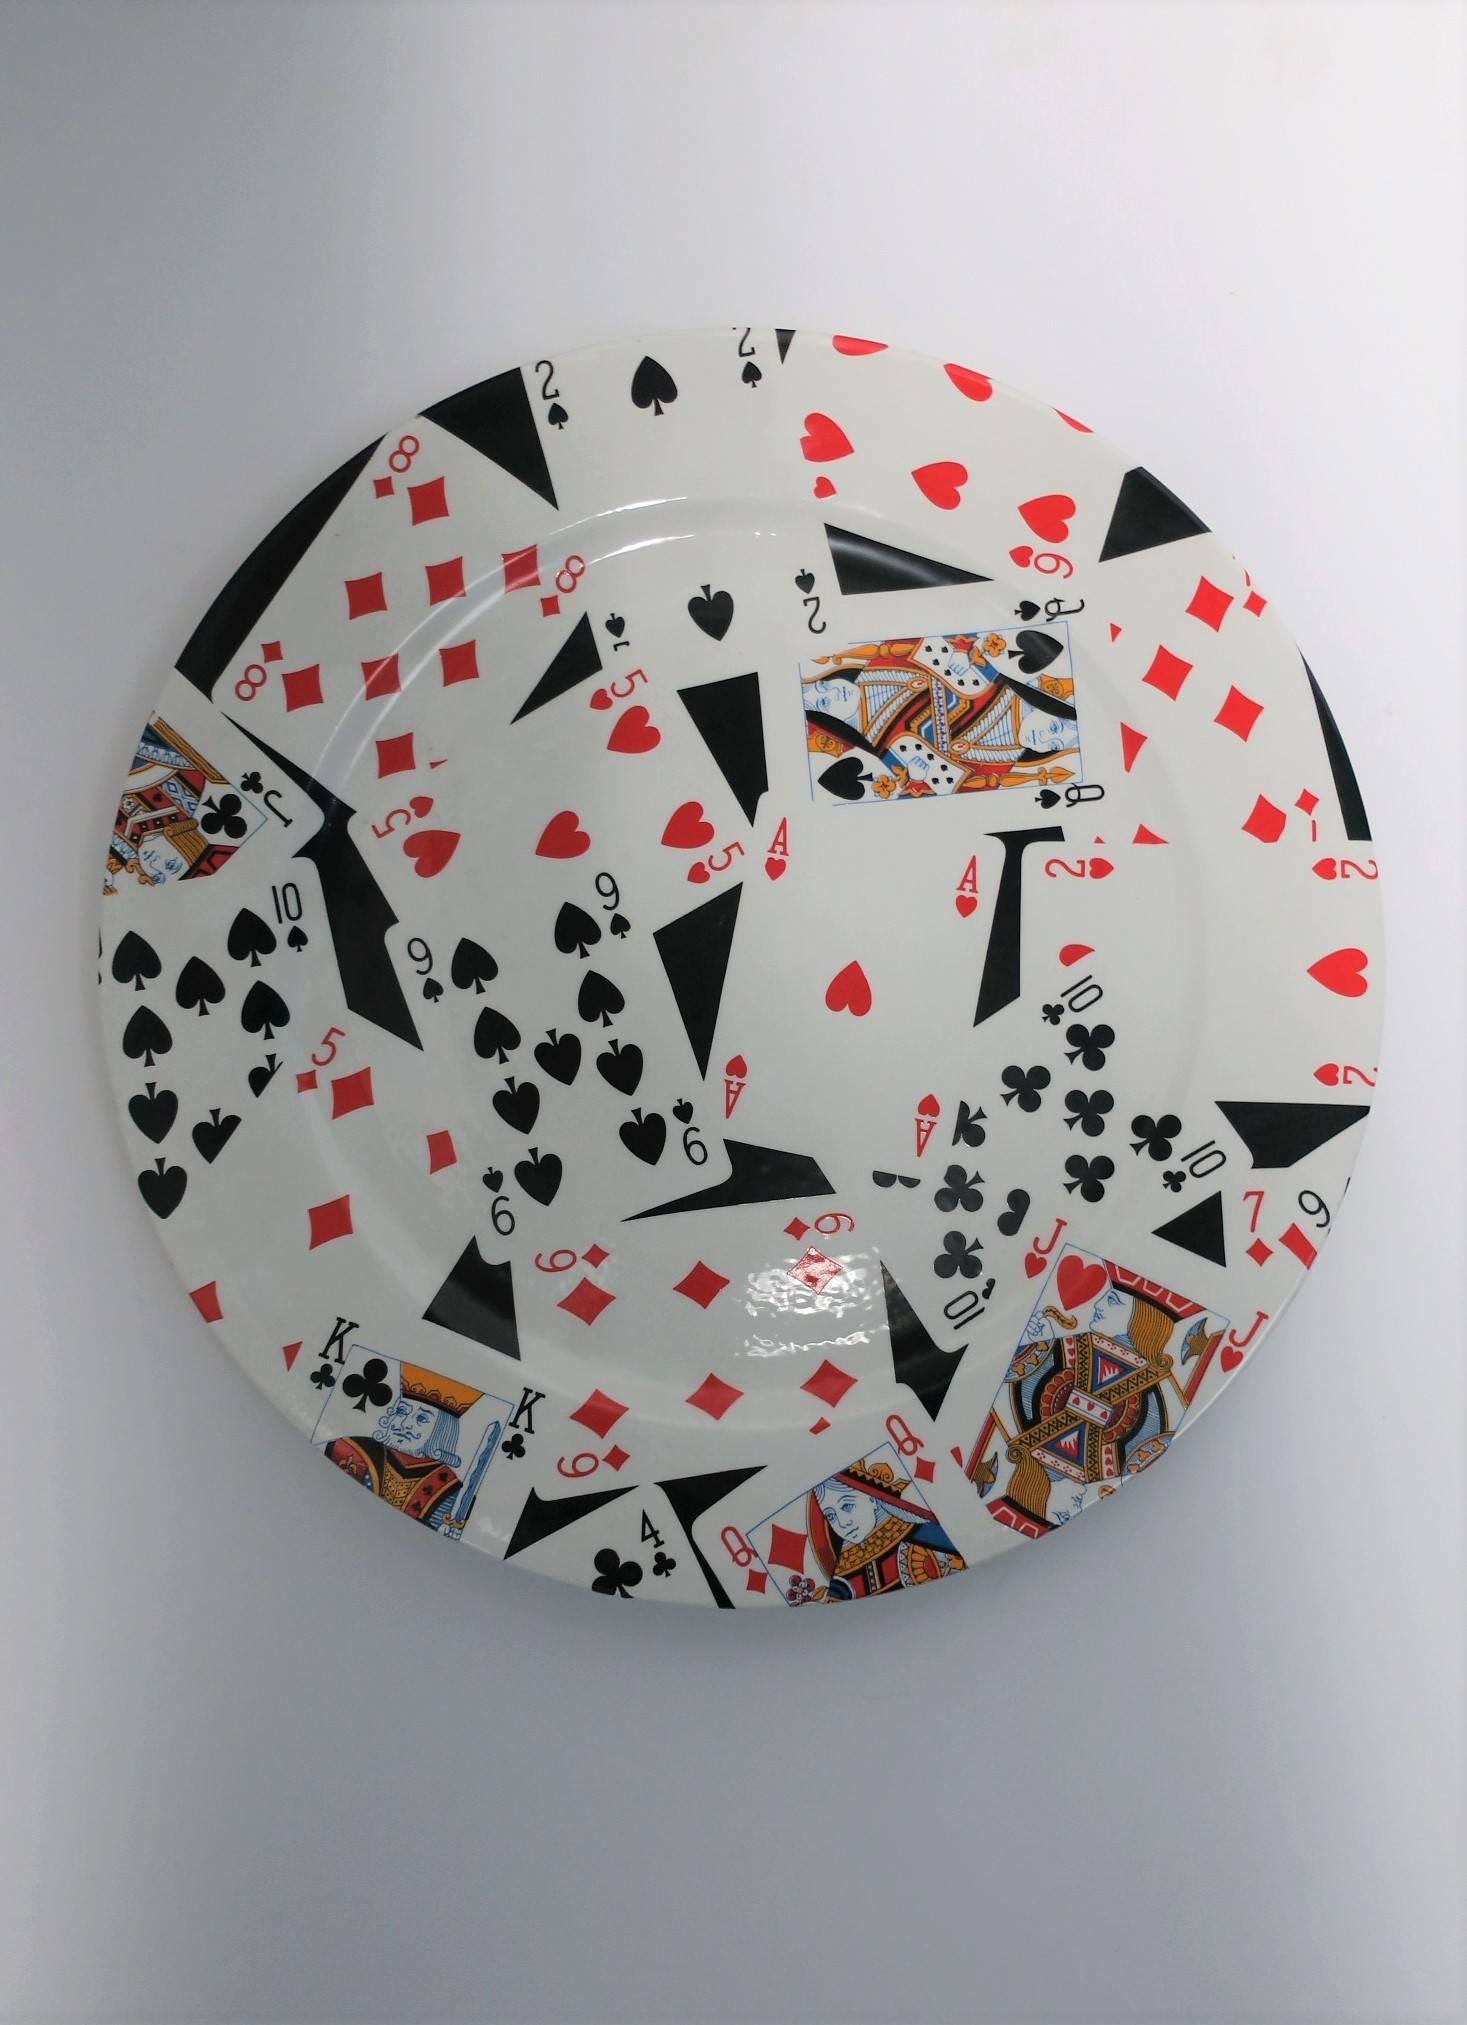 From luxury brand Gucci a ceramic plate with a 'suit' and 'face' playing card design, made in Italy by GUCCI. Plate can be used as a serving plate, or as a piece of art for display on a cocktail table or on the wall, etc. Plate measures: 12.5